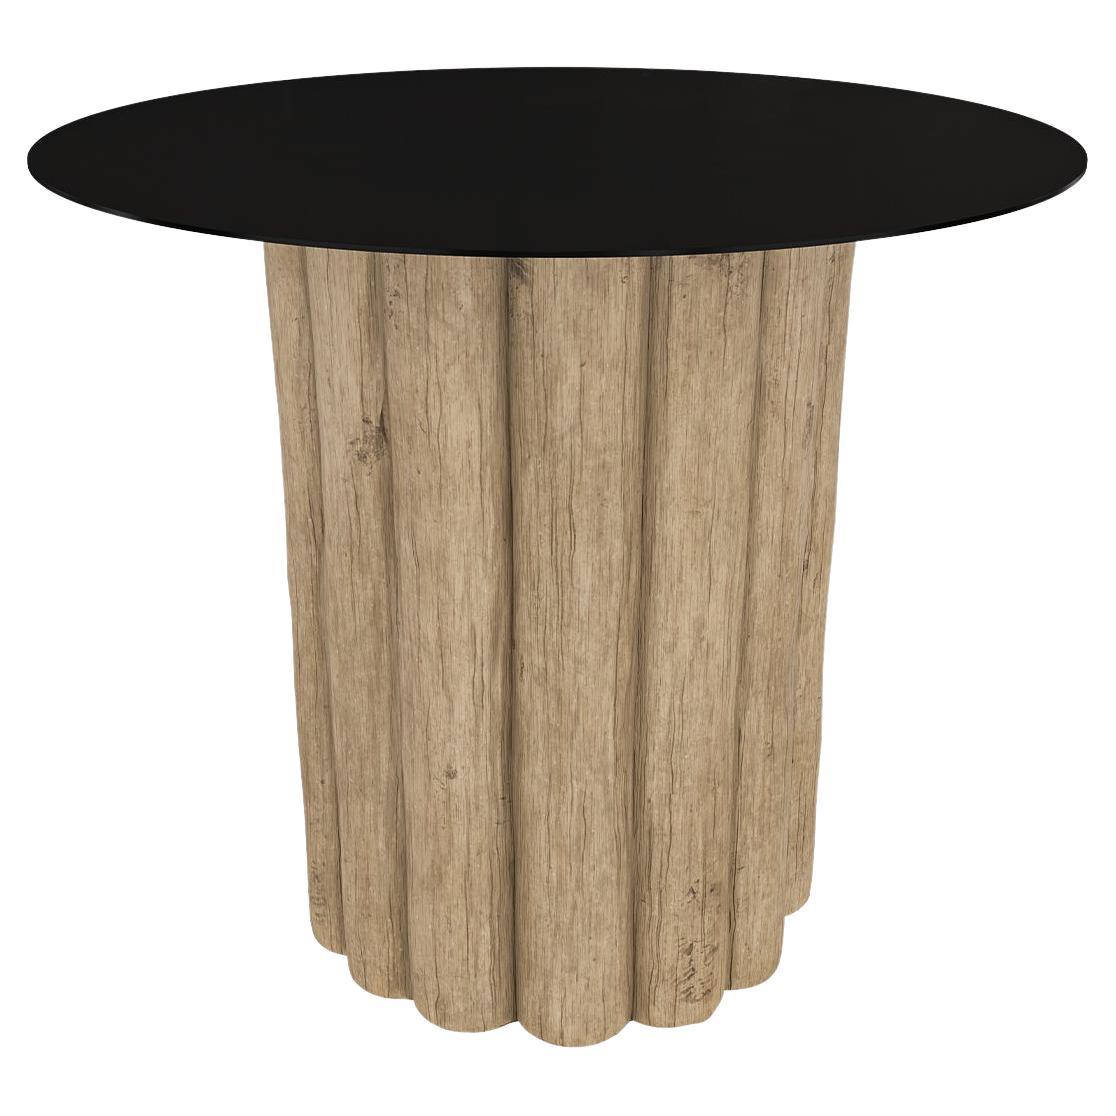 Natur Round Table, Natural Wood Body Leg For Sale